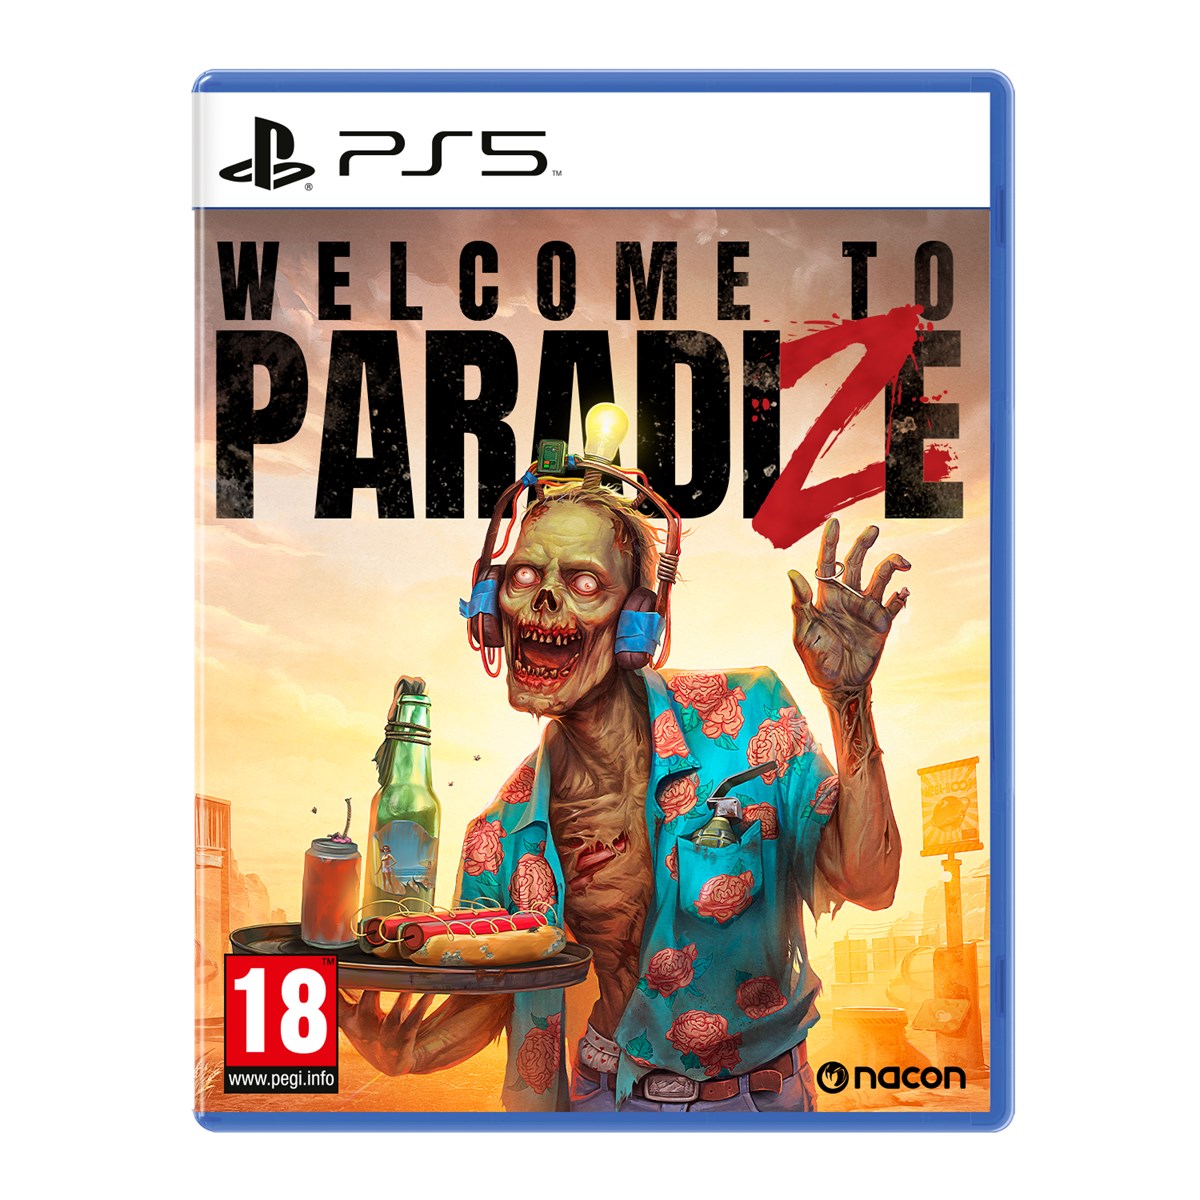 PS5 WELCOME TO PARADIZE